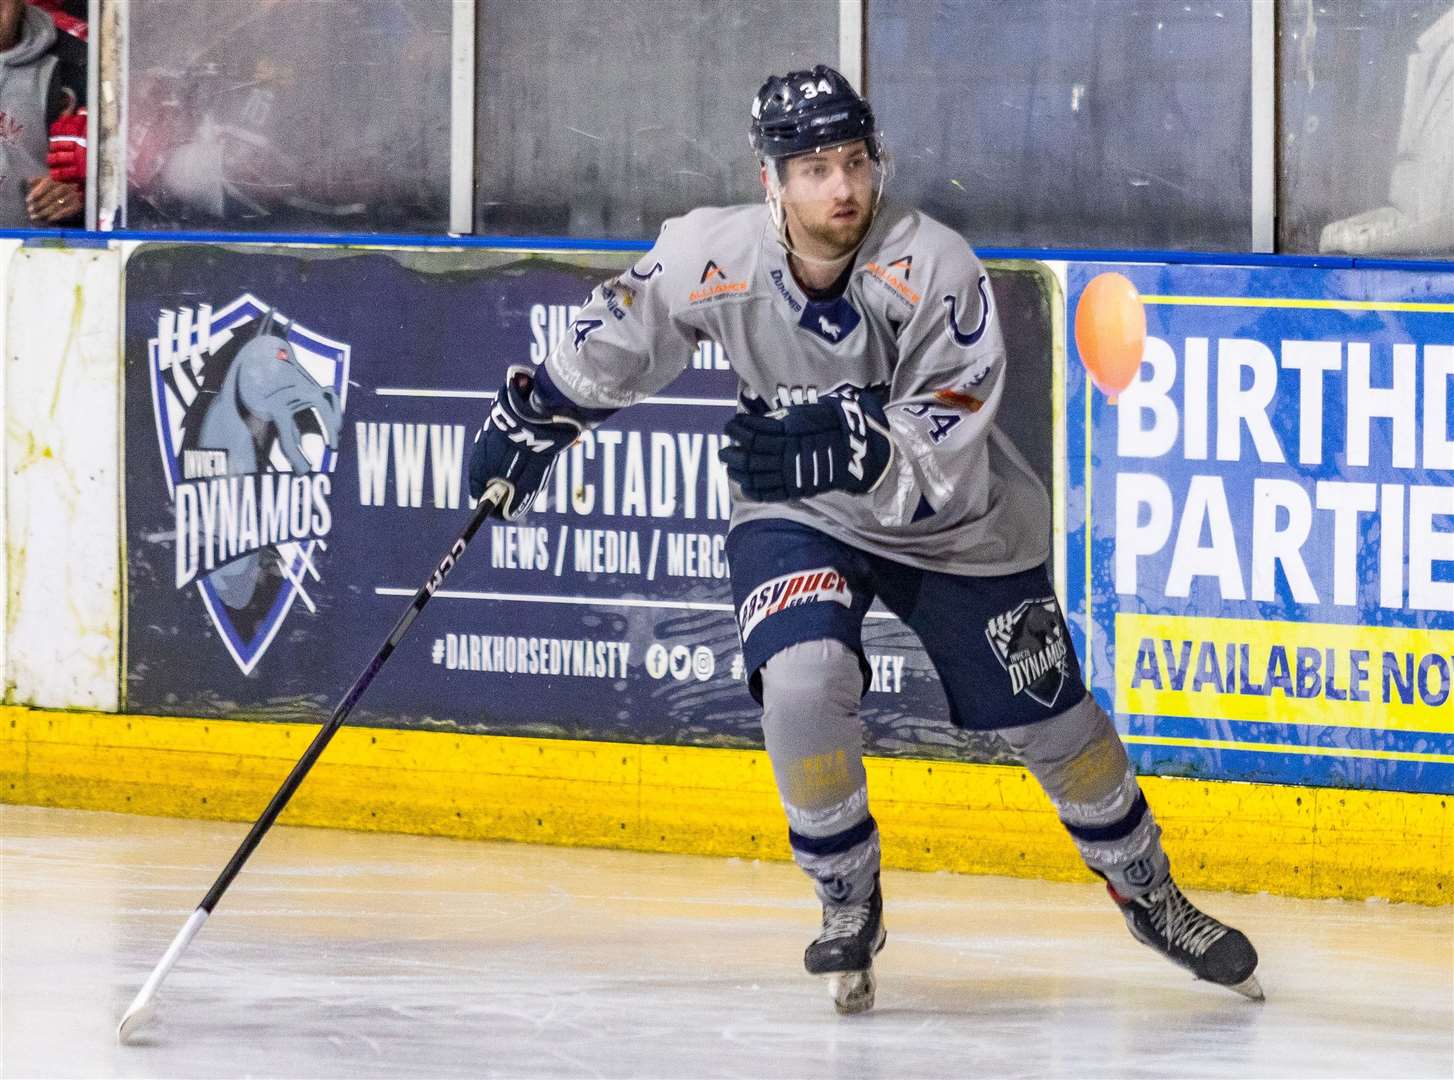 Owen Dell was on target in both games for Invicta Dynamos Picture: David Trevallion